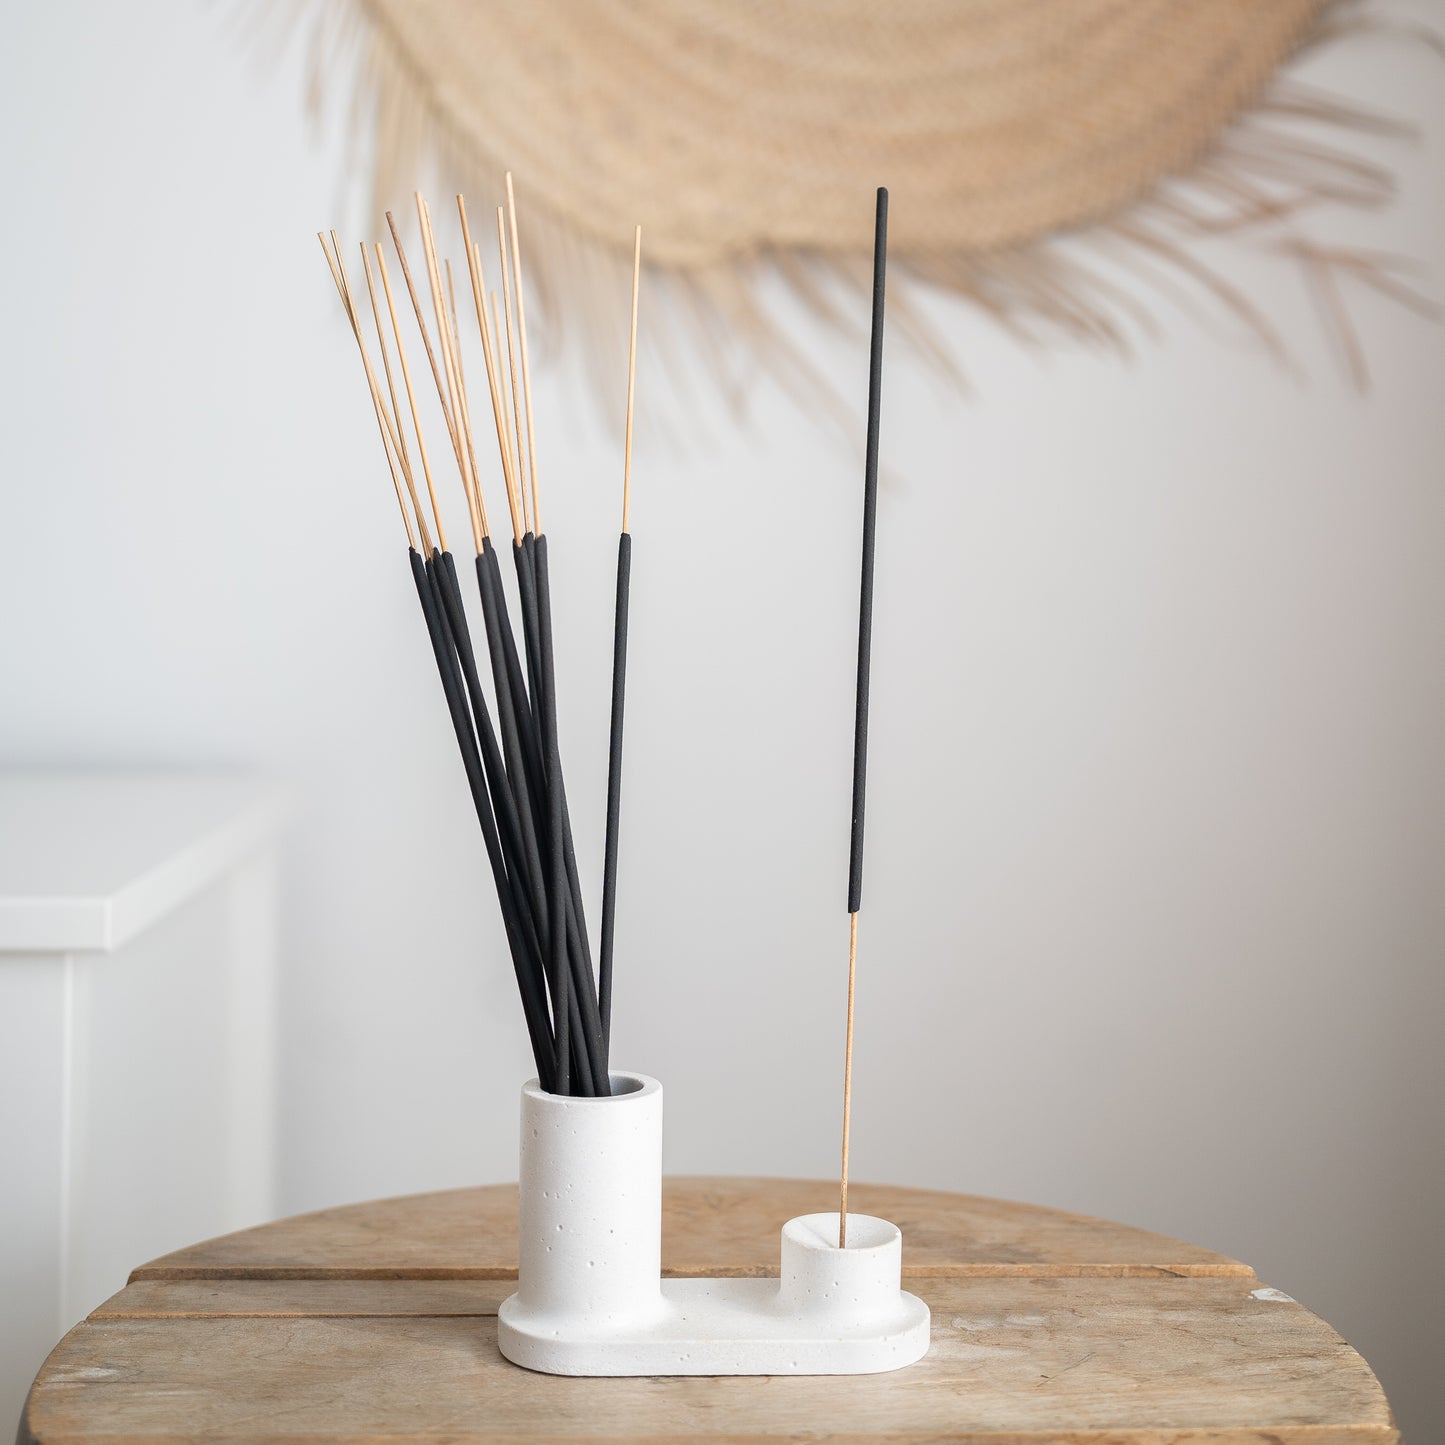 Circular incense holder hand-made with white cement. Incense are shown in the holder, with an area to burn an incense stick, and an area to store extra incense. Made by Paige Soy Candles